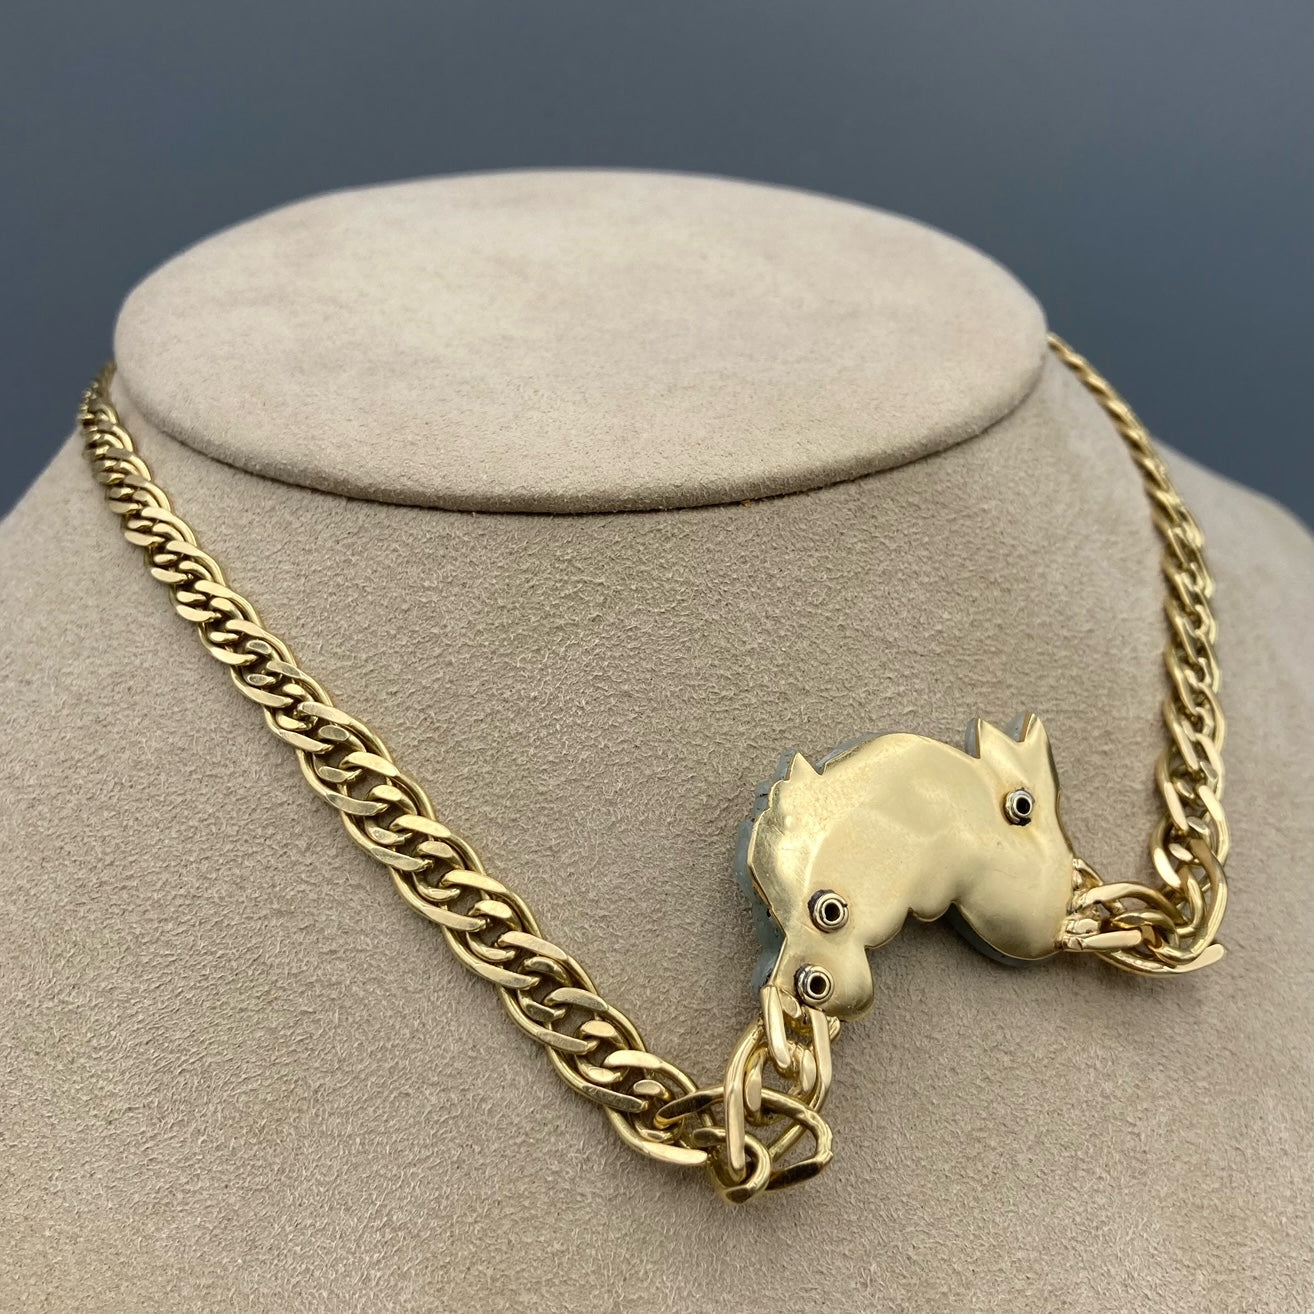 18k Yellow gold Curb Chain with Jade Dragon Accented with 3 Diamonds